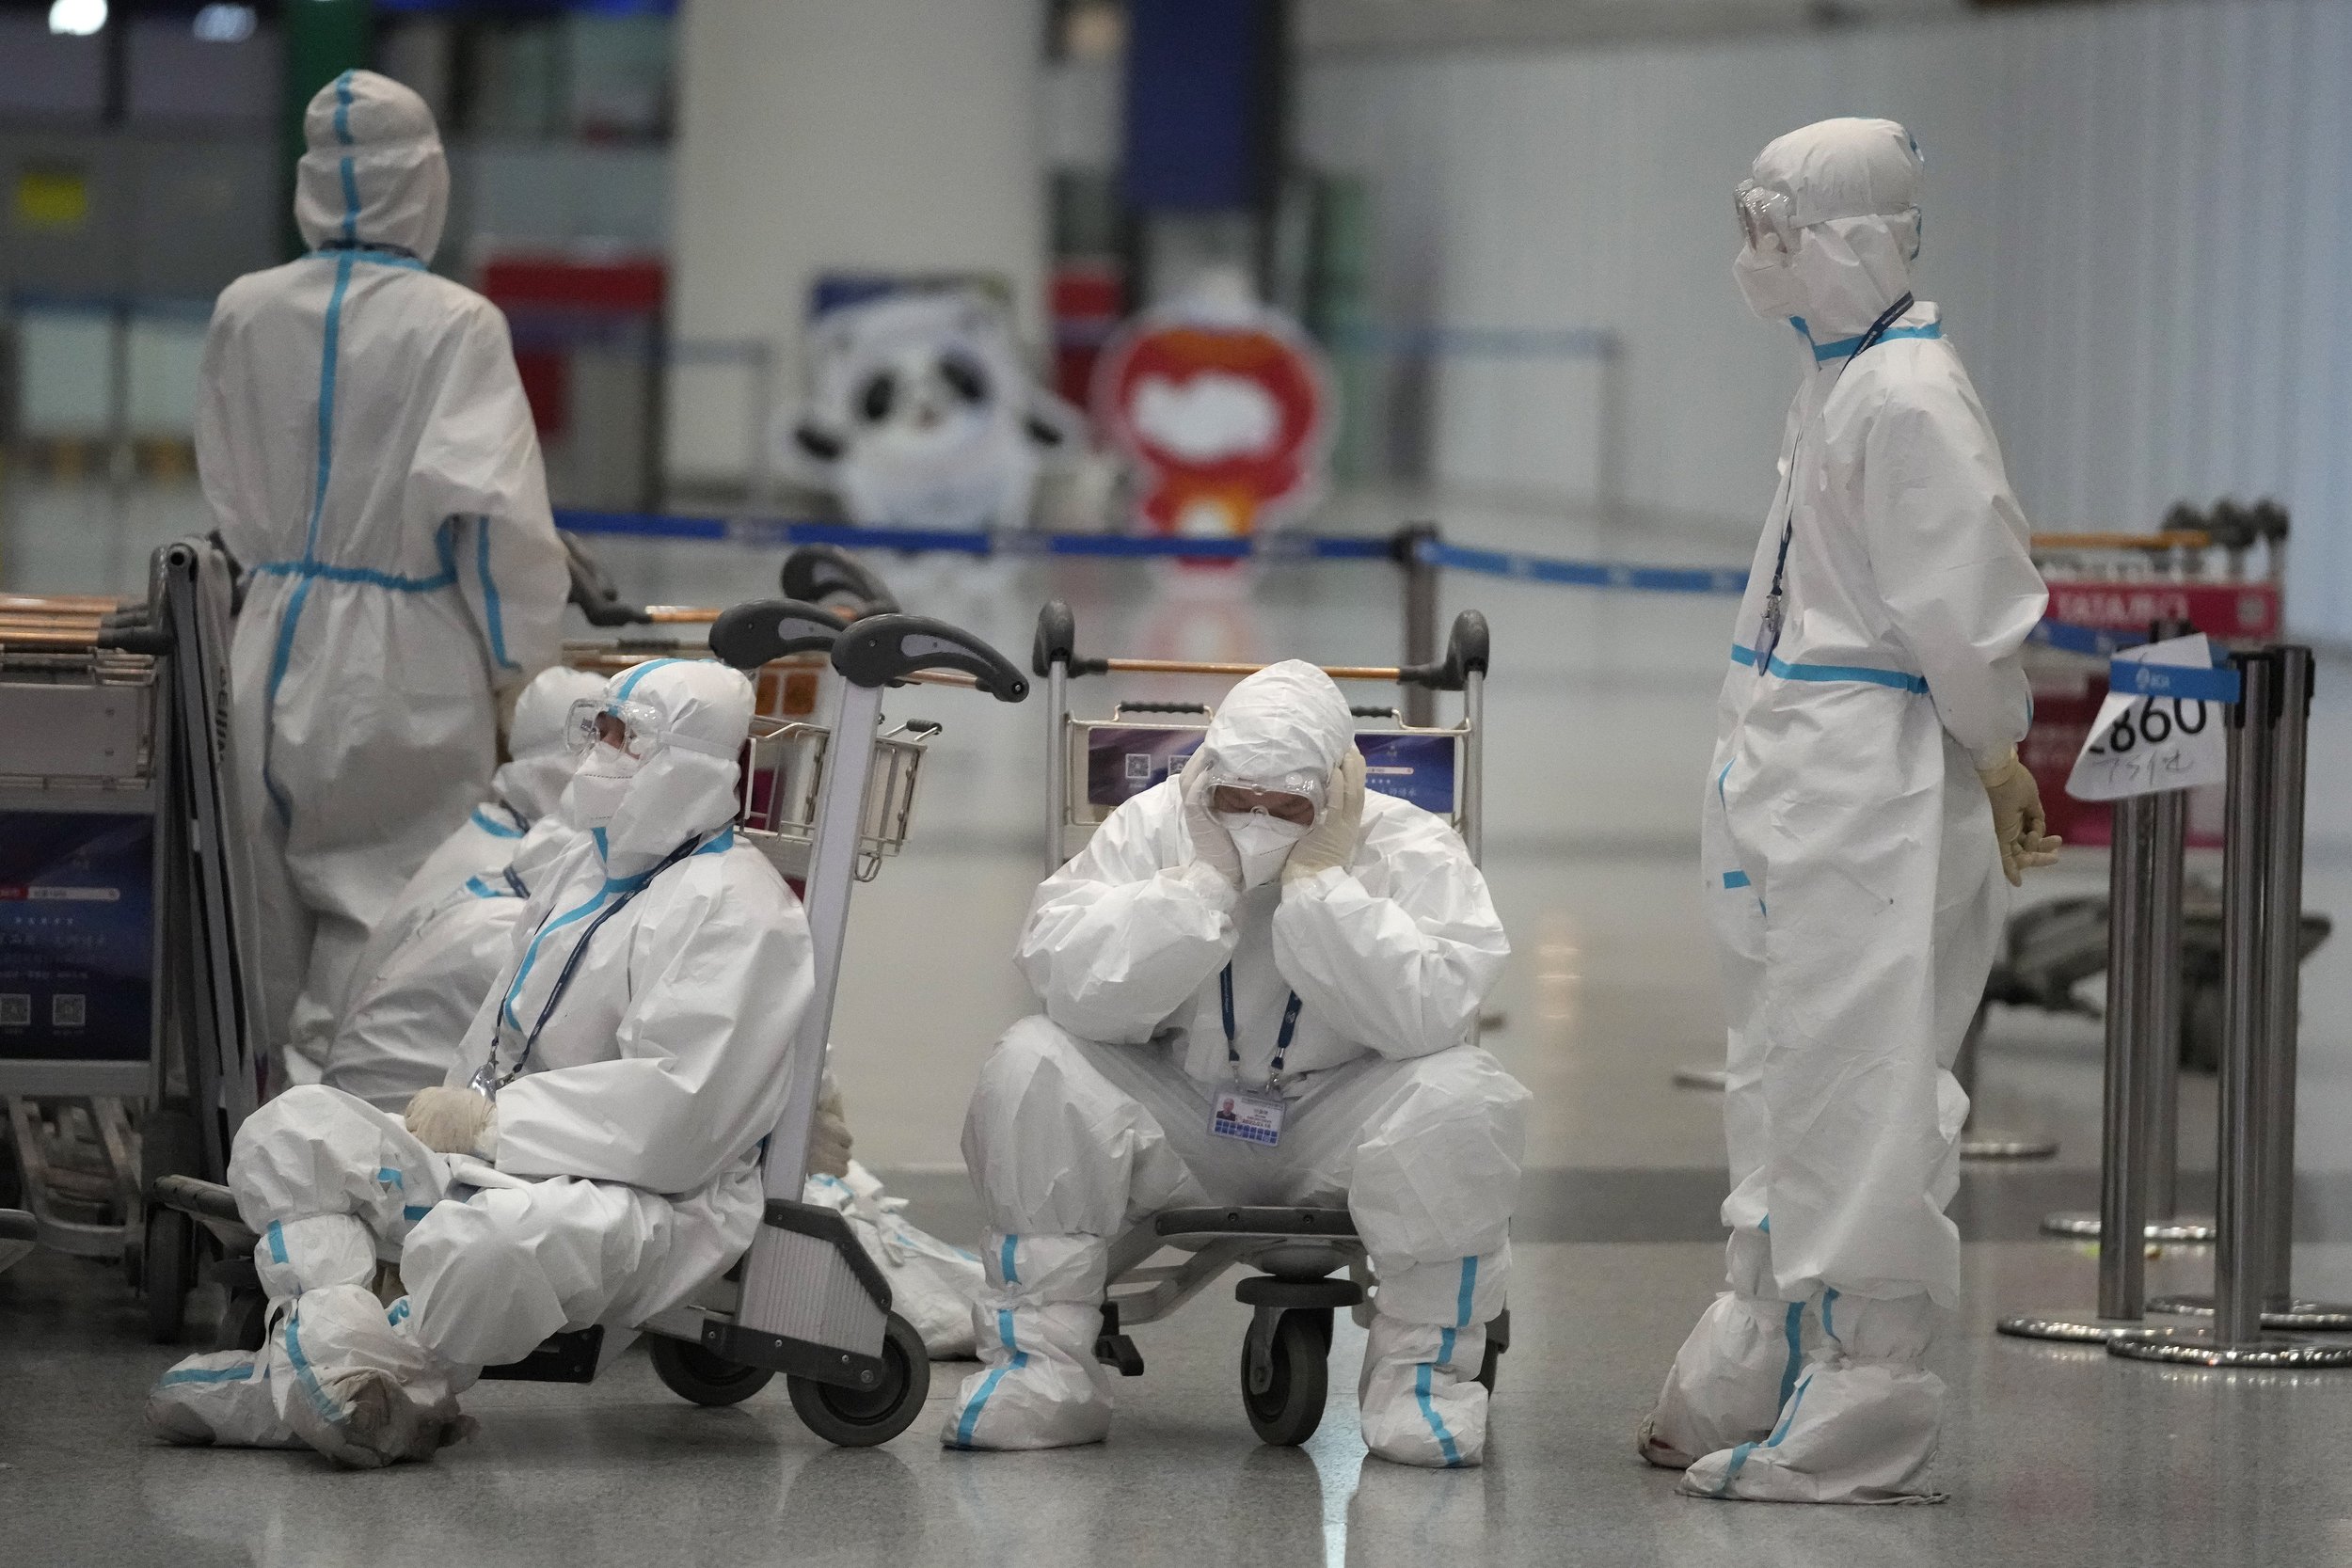  Olympic workers in protective clothing take a rest after helping travelers at the Beijing Capital International Airport after the 2022 Winter Olympics, Monday, Feb. 21, 2022, in Beijing, China. (AP Photo/Frank Augstein) 